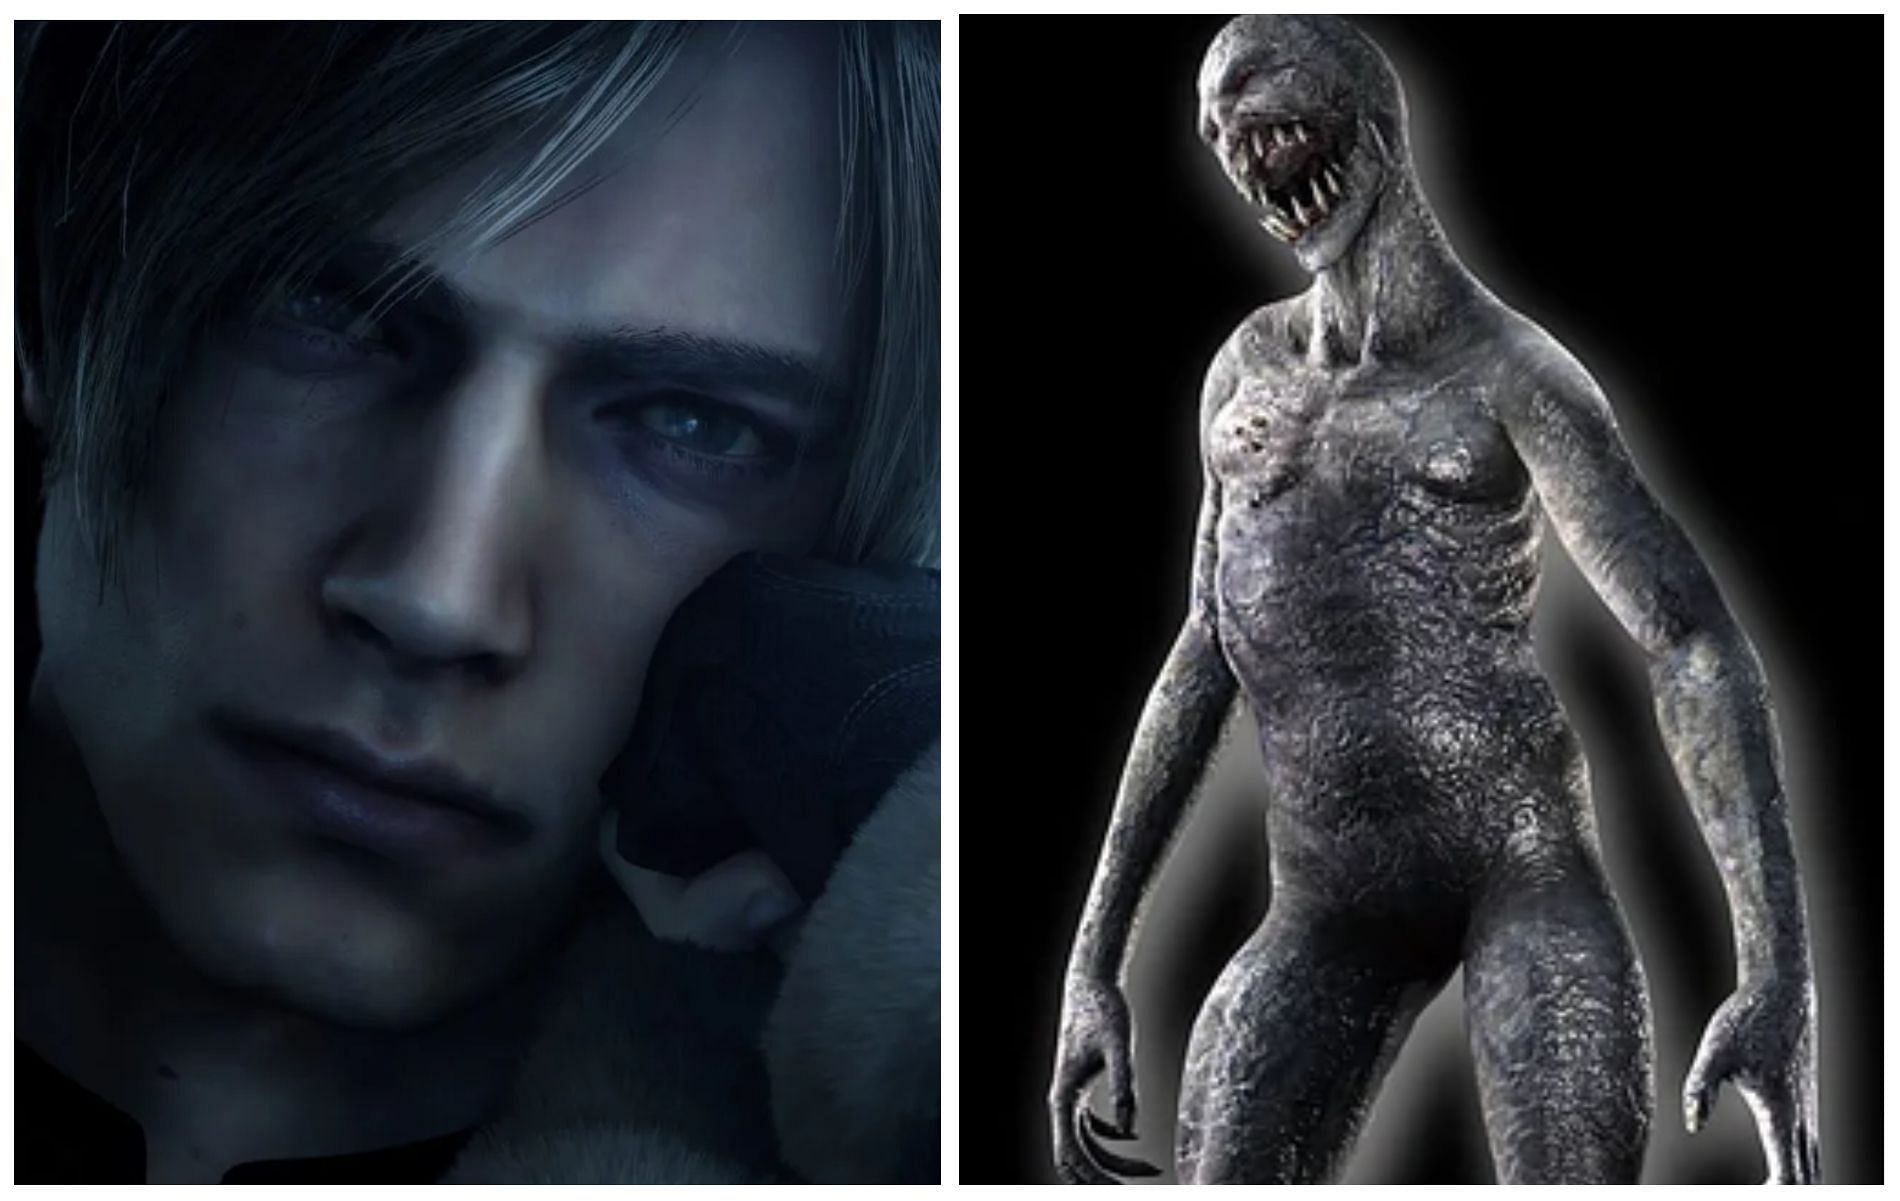 RE 4 featured terrifying mini-bosses in addition to the gameplay, story and main bosses (Image via Capcom)